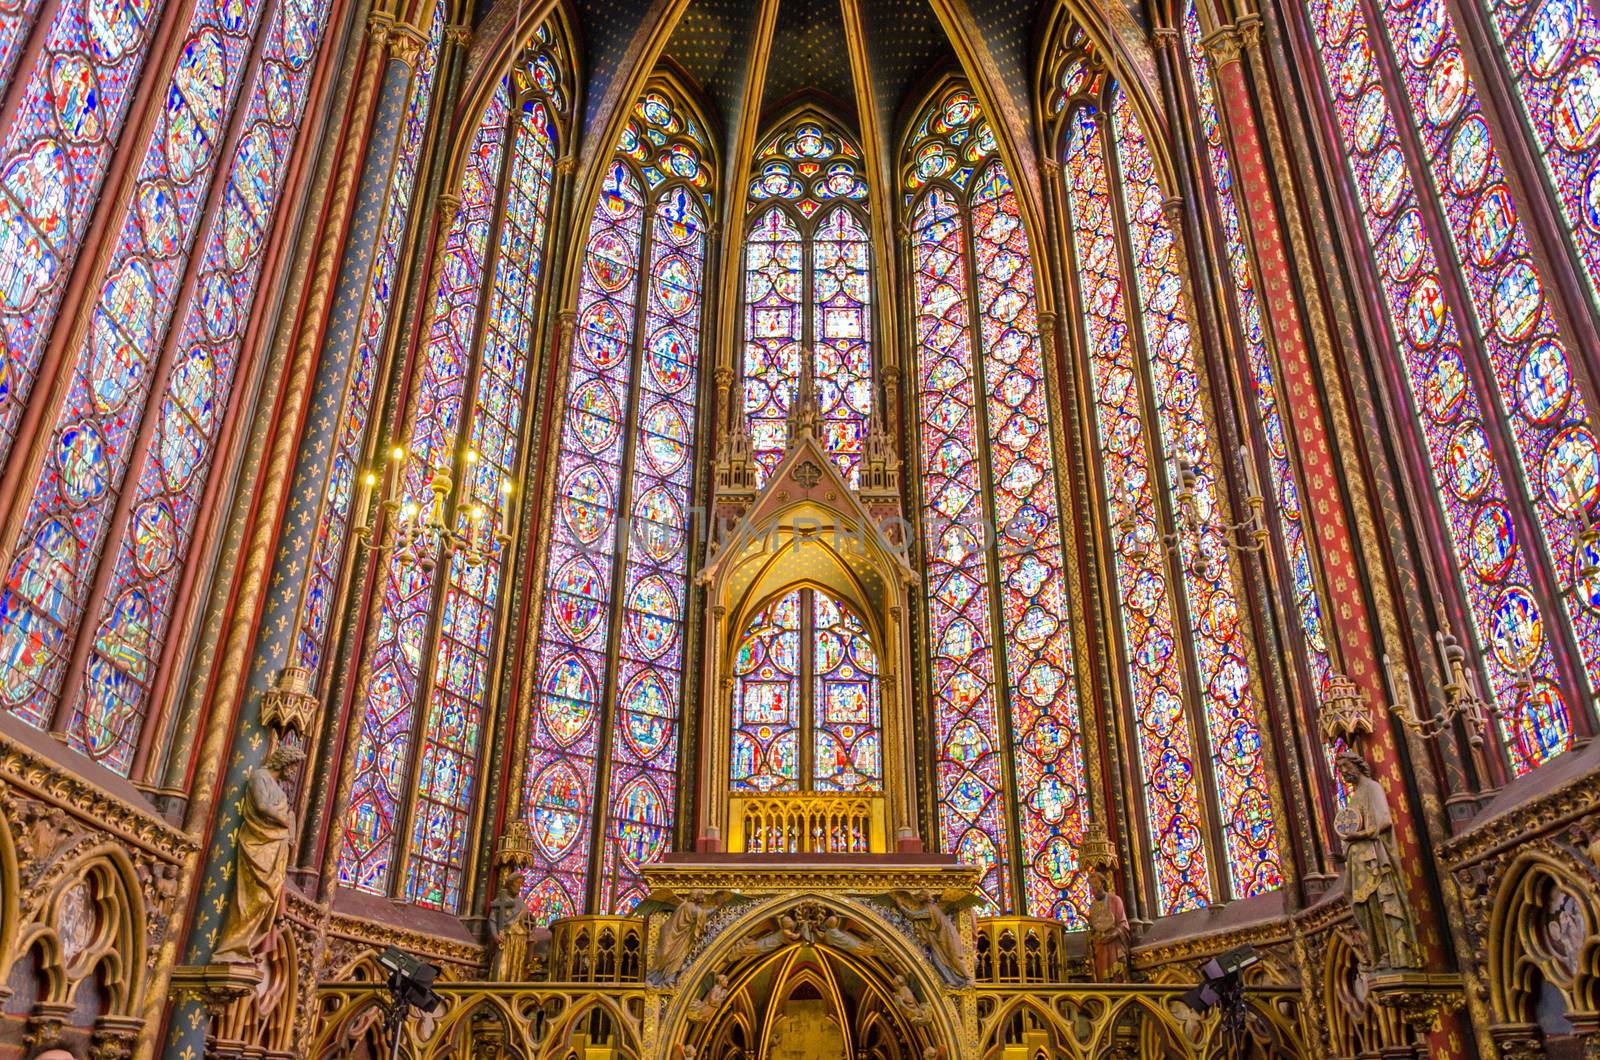 Artistic interior of the Sainte Chapelle in Paris by siraanamwong